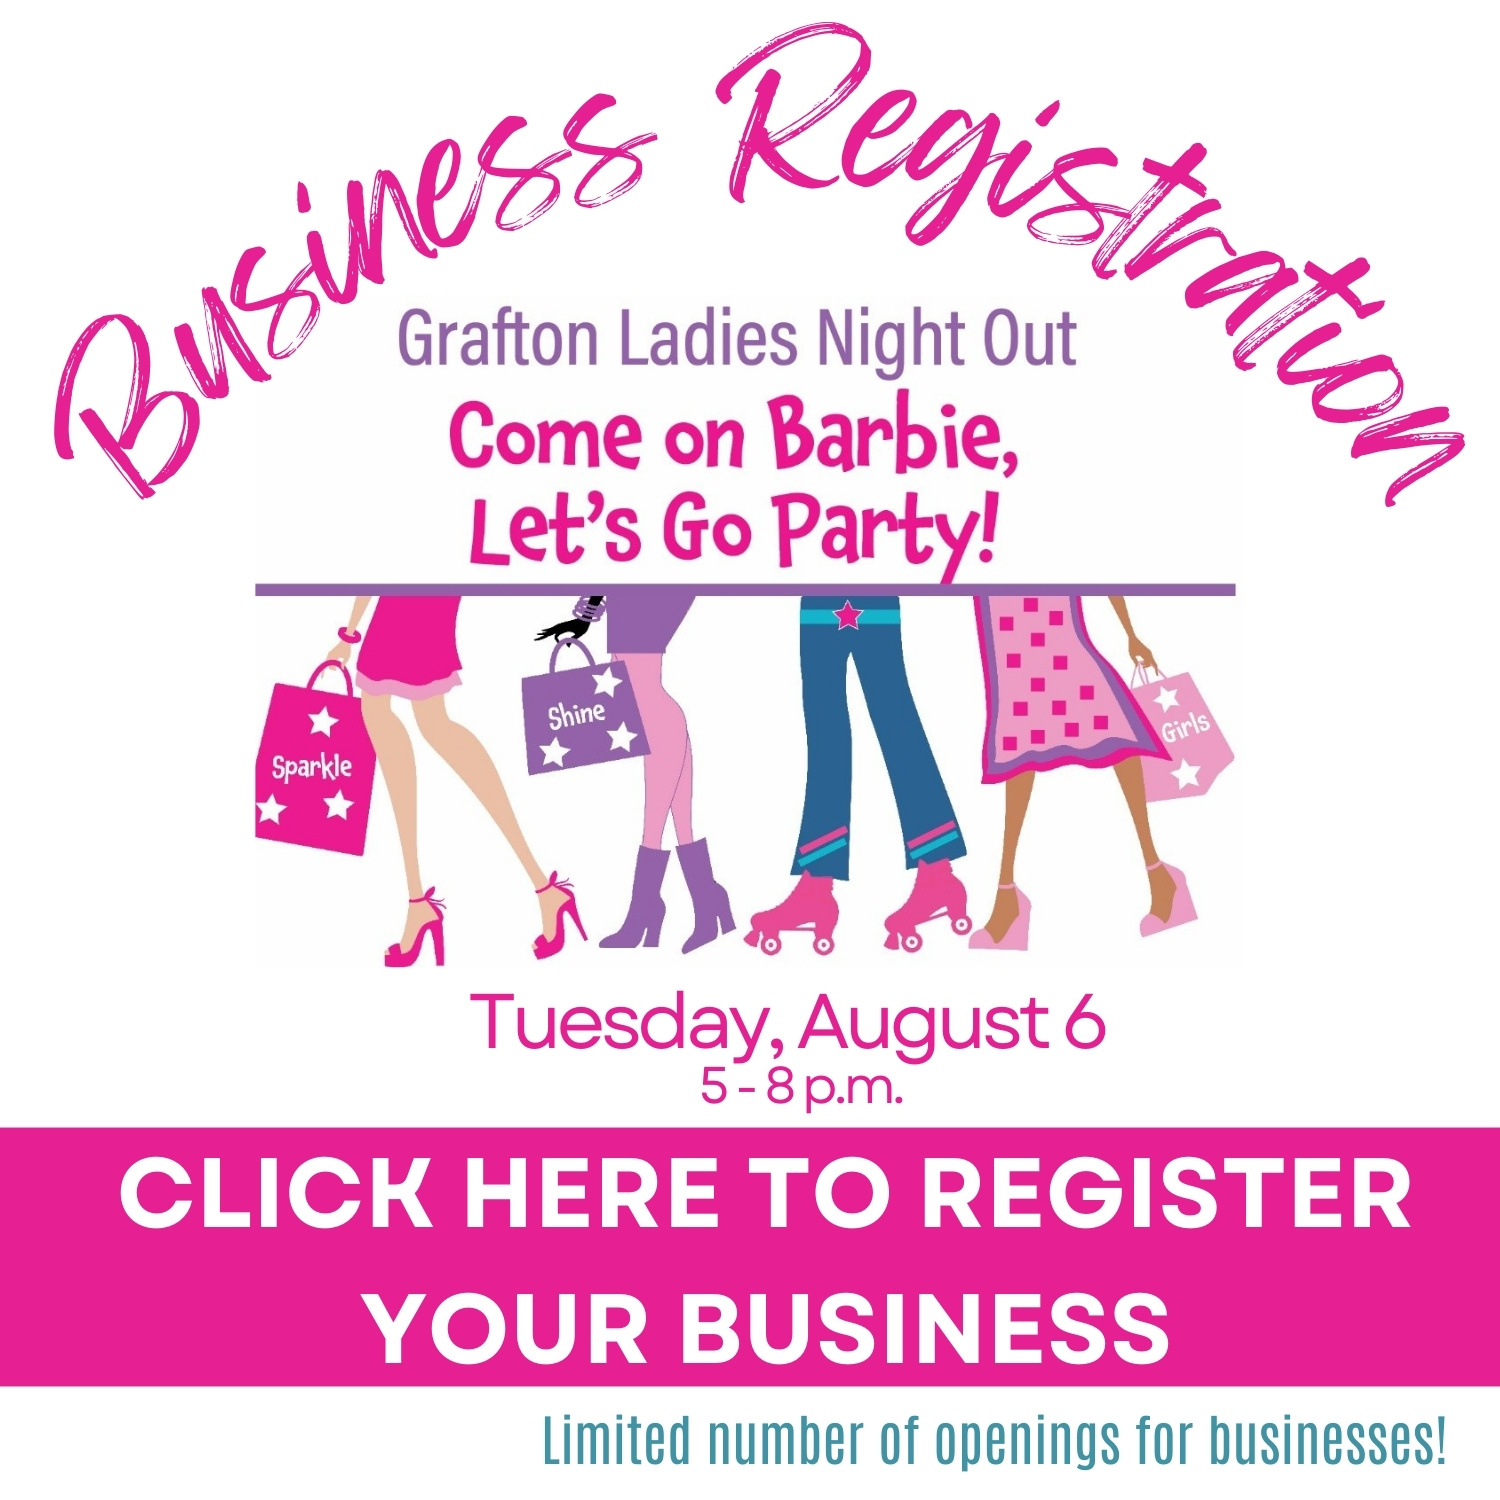 Barbie ladies night out businesses 2024 (4.35 x 5.24 in) (5 x 5 in)